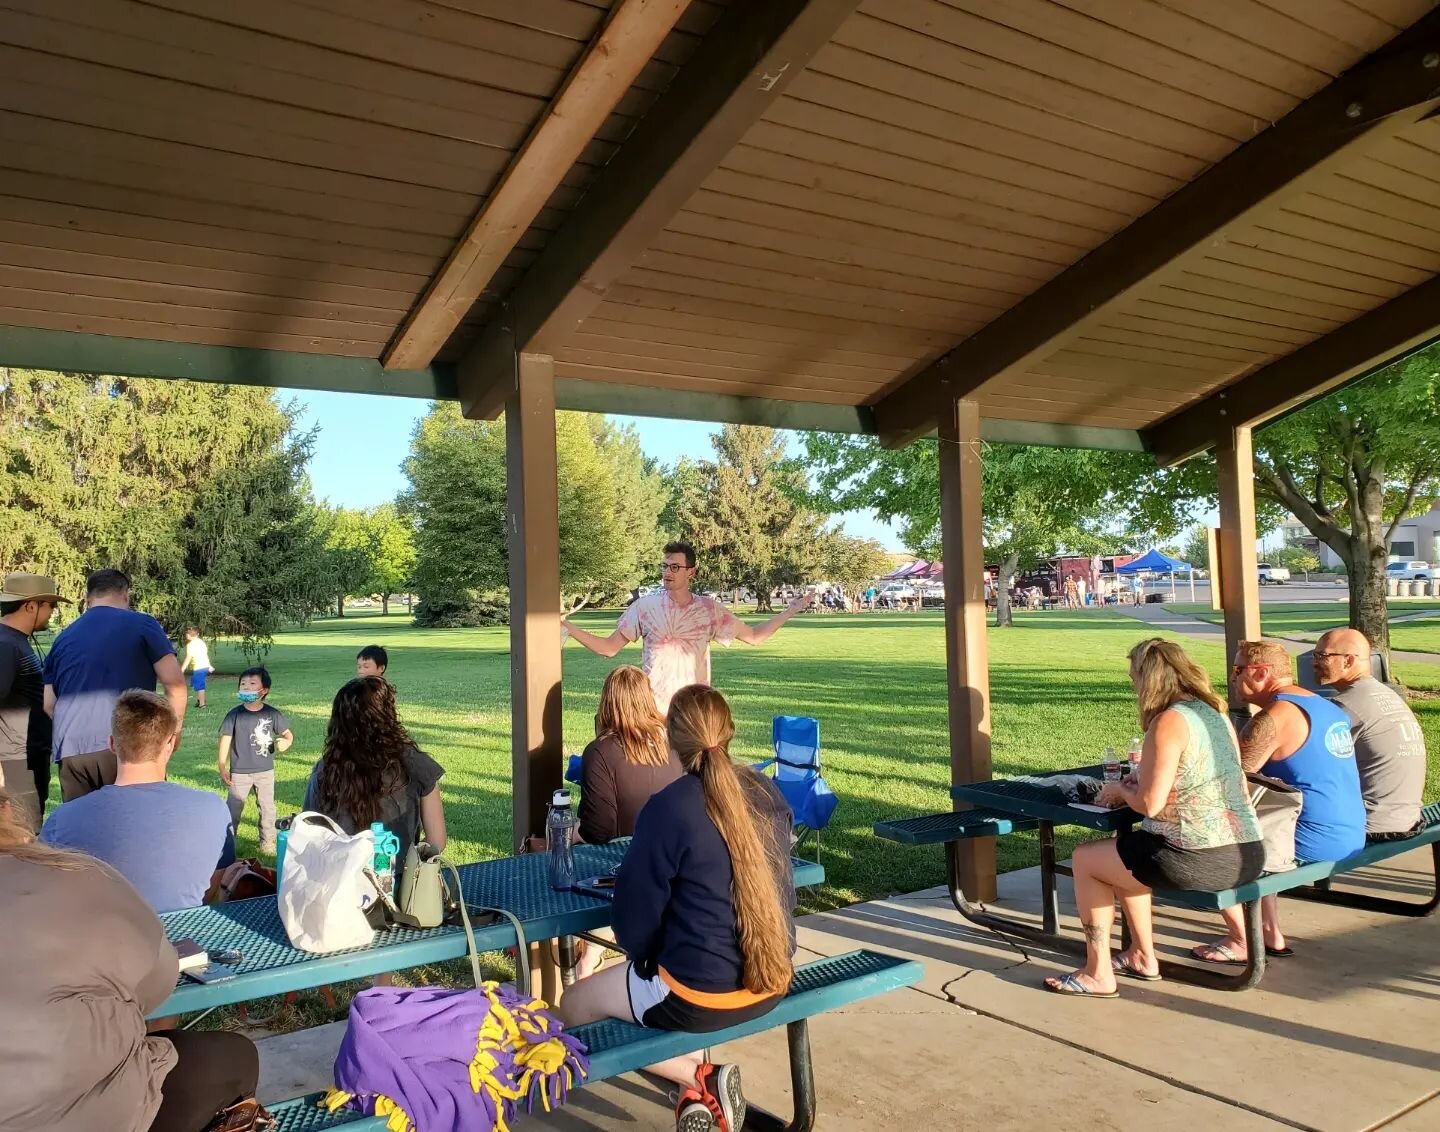 🌳Midweek in the Park☀️
//
Last night we had our first midweek in the park for the month of August! We had a great discussion about trust then broke off into small groups to pray. Lots of great fellowship and fun! Join us next Thursday 7pm at Columbi